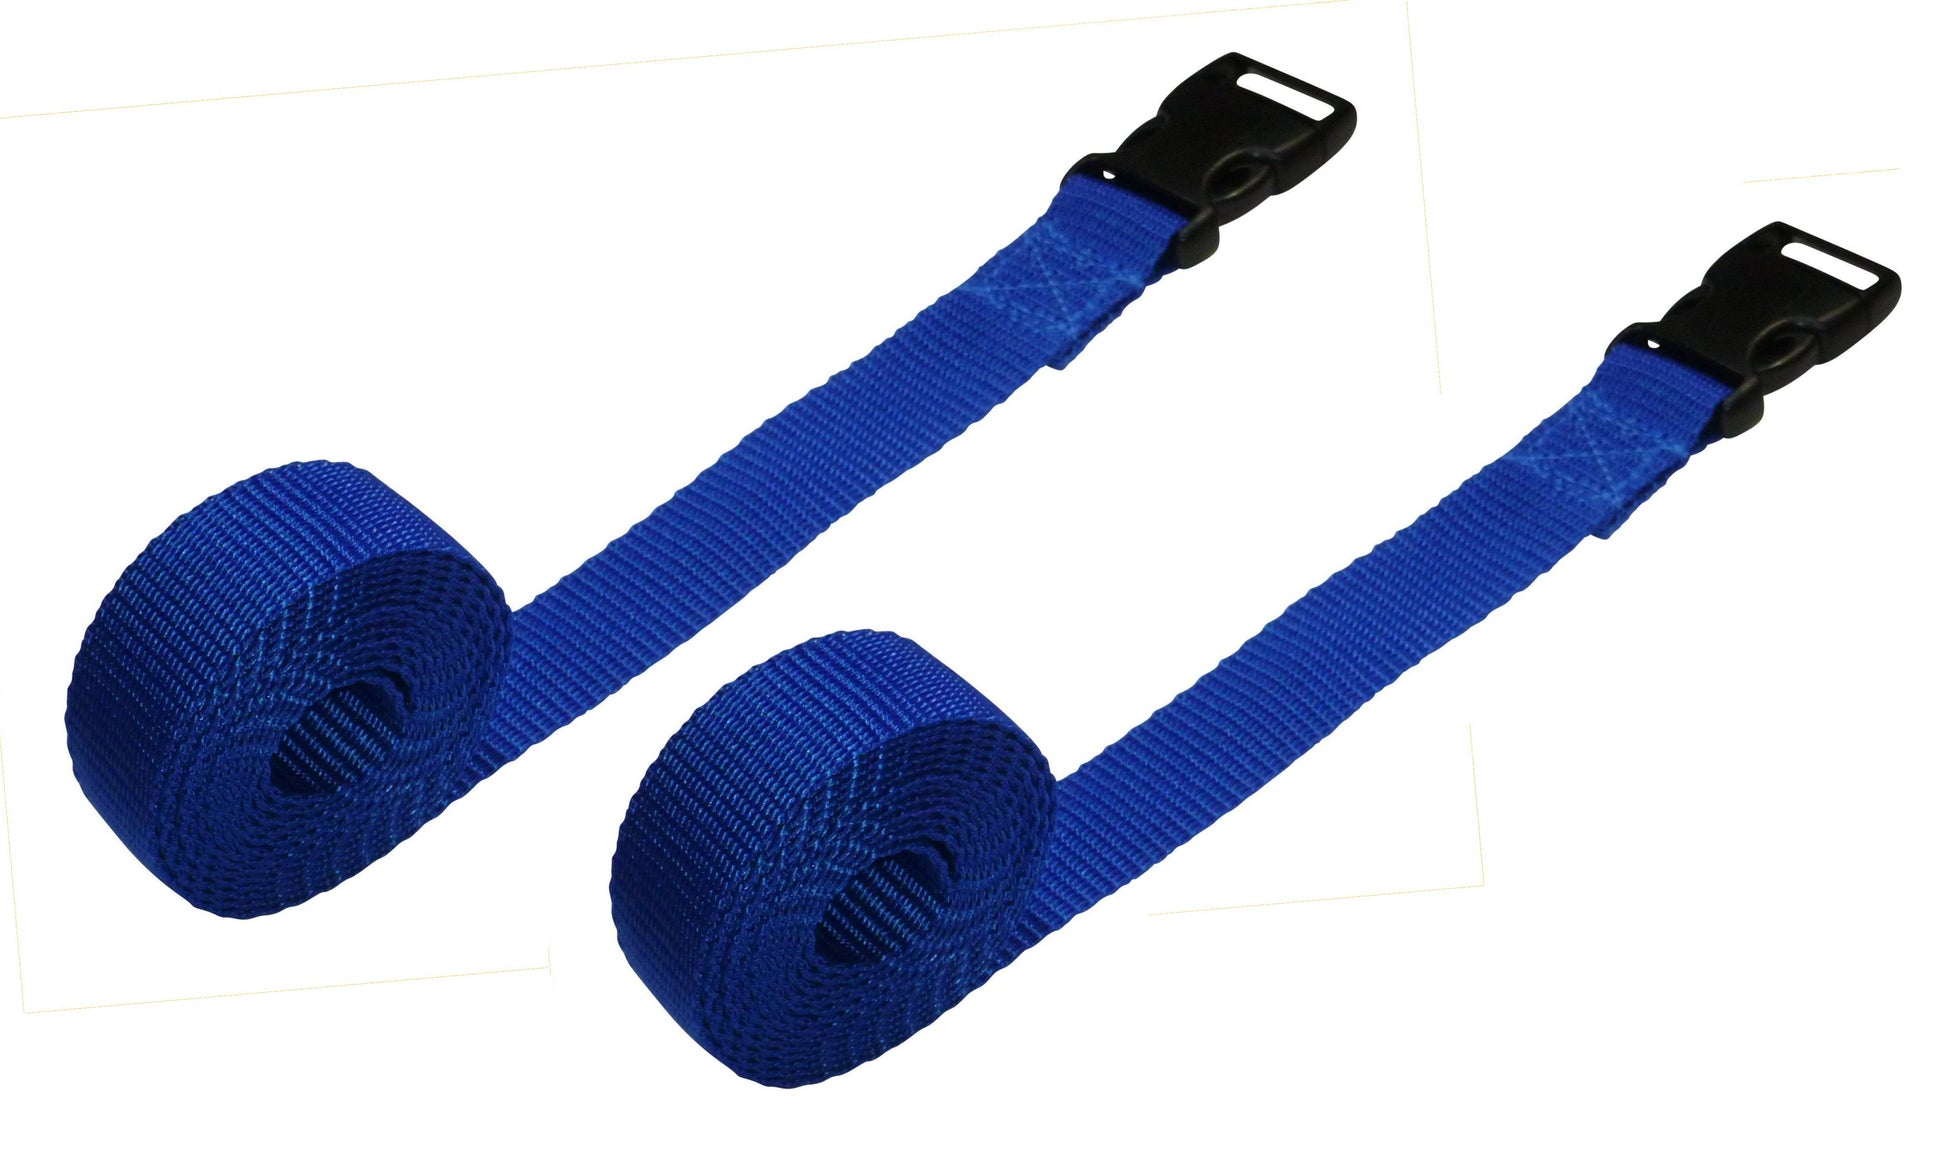 Benristraps 2 Pack Webbing Straps with Clips - Adjustable Luggage Straps in blue